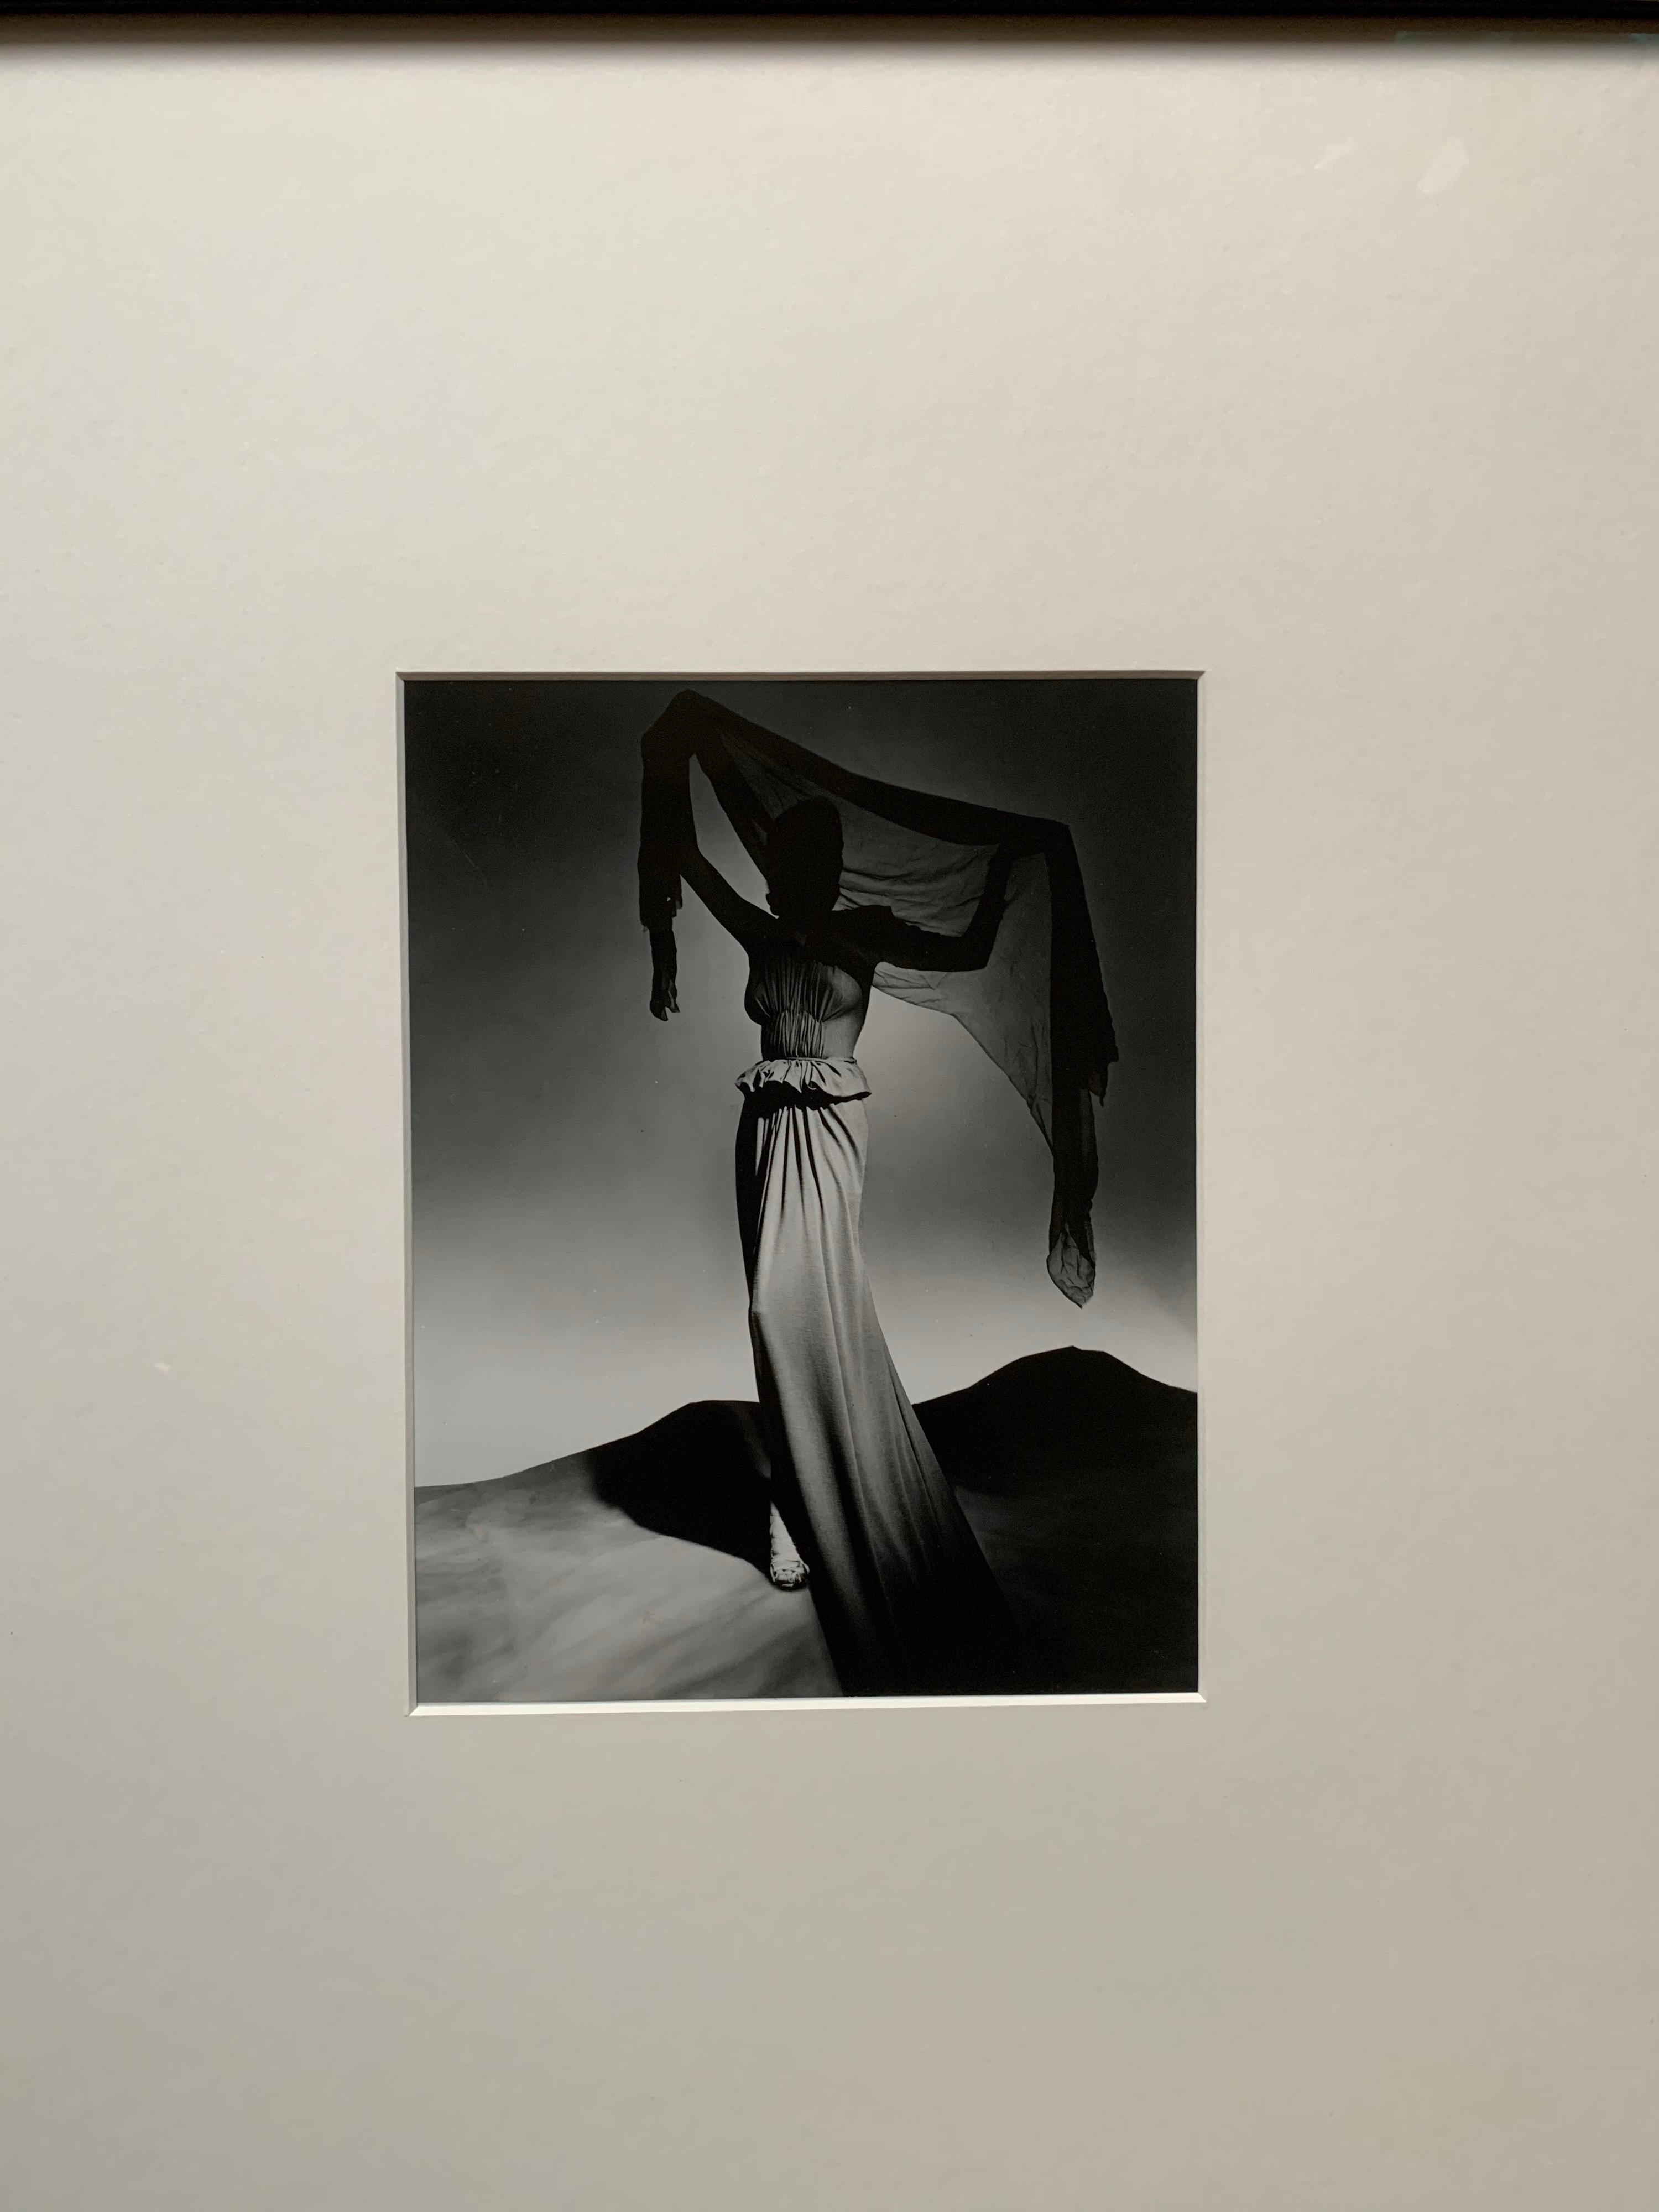 The silver gelatin photograph was printed by the photography department of the Metropolitan Museum of Art in New York City in the 1990s frim the original negative. George Platt Lynes (1907 to 1955) was a legendary fashion photographer who shot